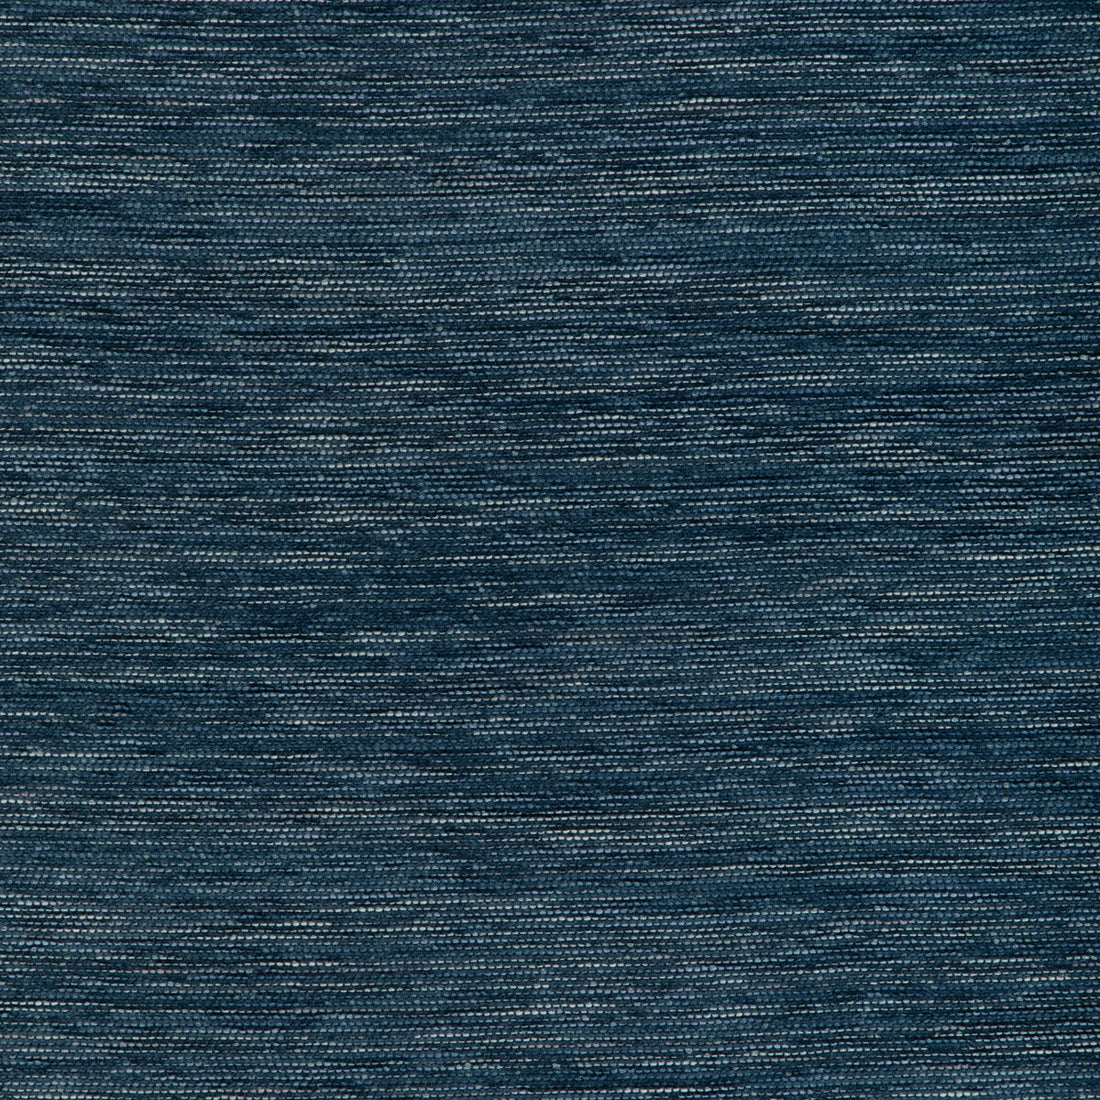 Foray Texture fabric in blue color - pattern 8023156.55.0 - by Brunschwig &amp; Fils in the Chambery Textures IV collection